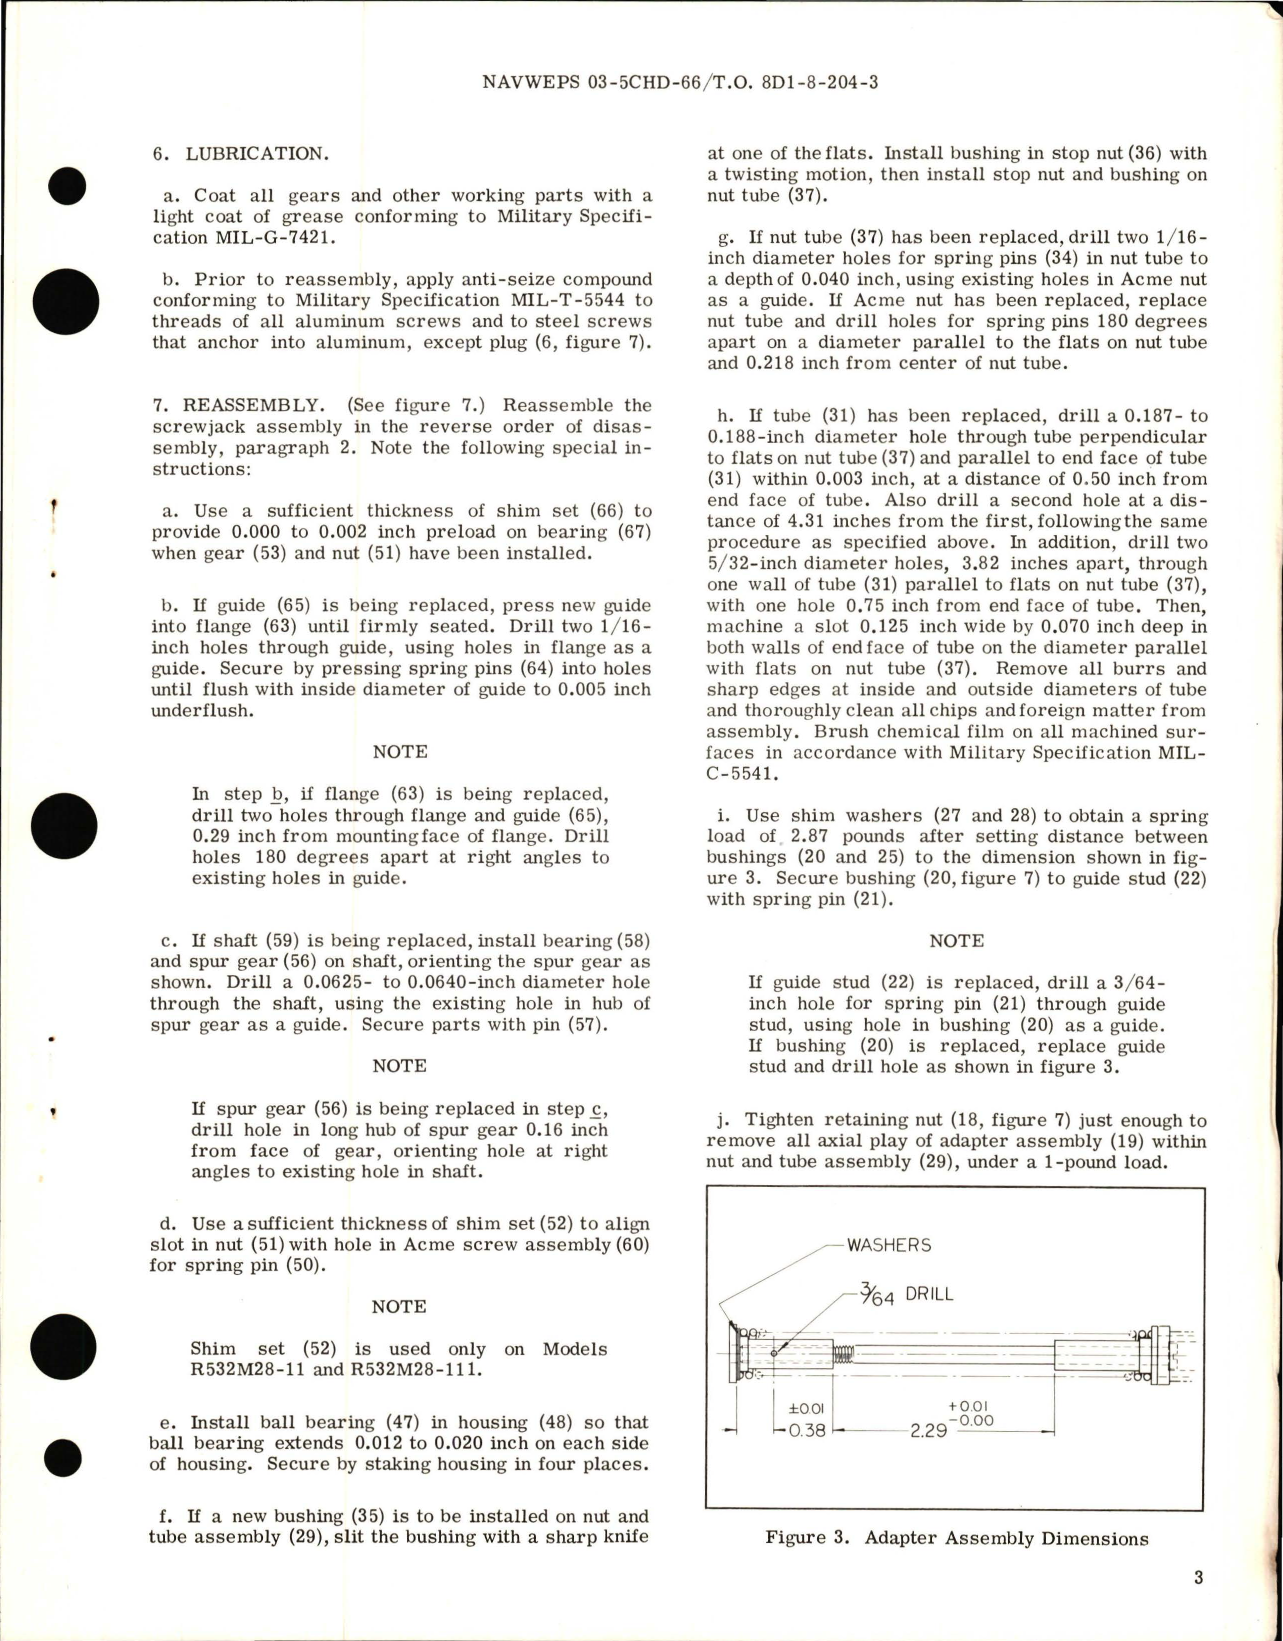 Sample page 5 from AirCorps Library document: Overhaul with Parts Breakdown for Screwjack Assembly Models R532M28, R532M28-1, R532M28-11, and R532M28-111  